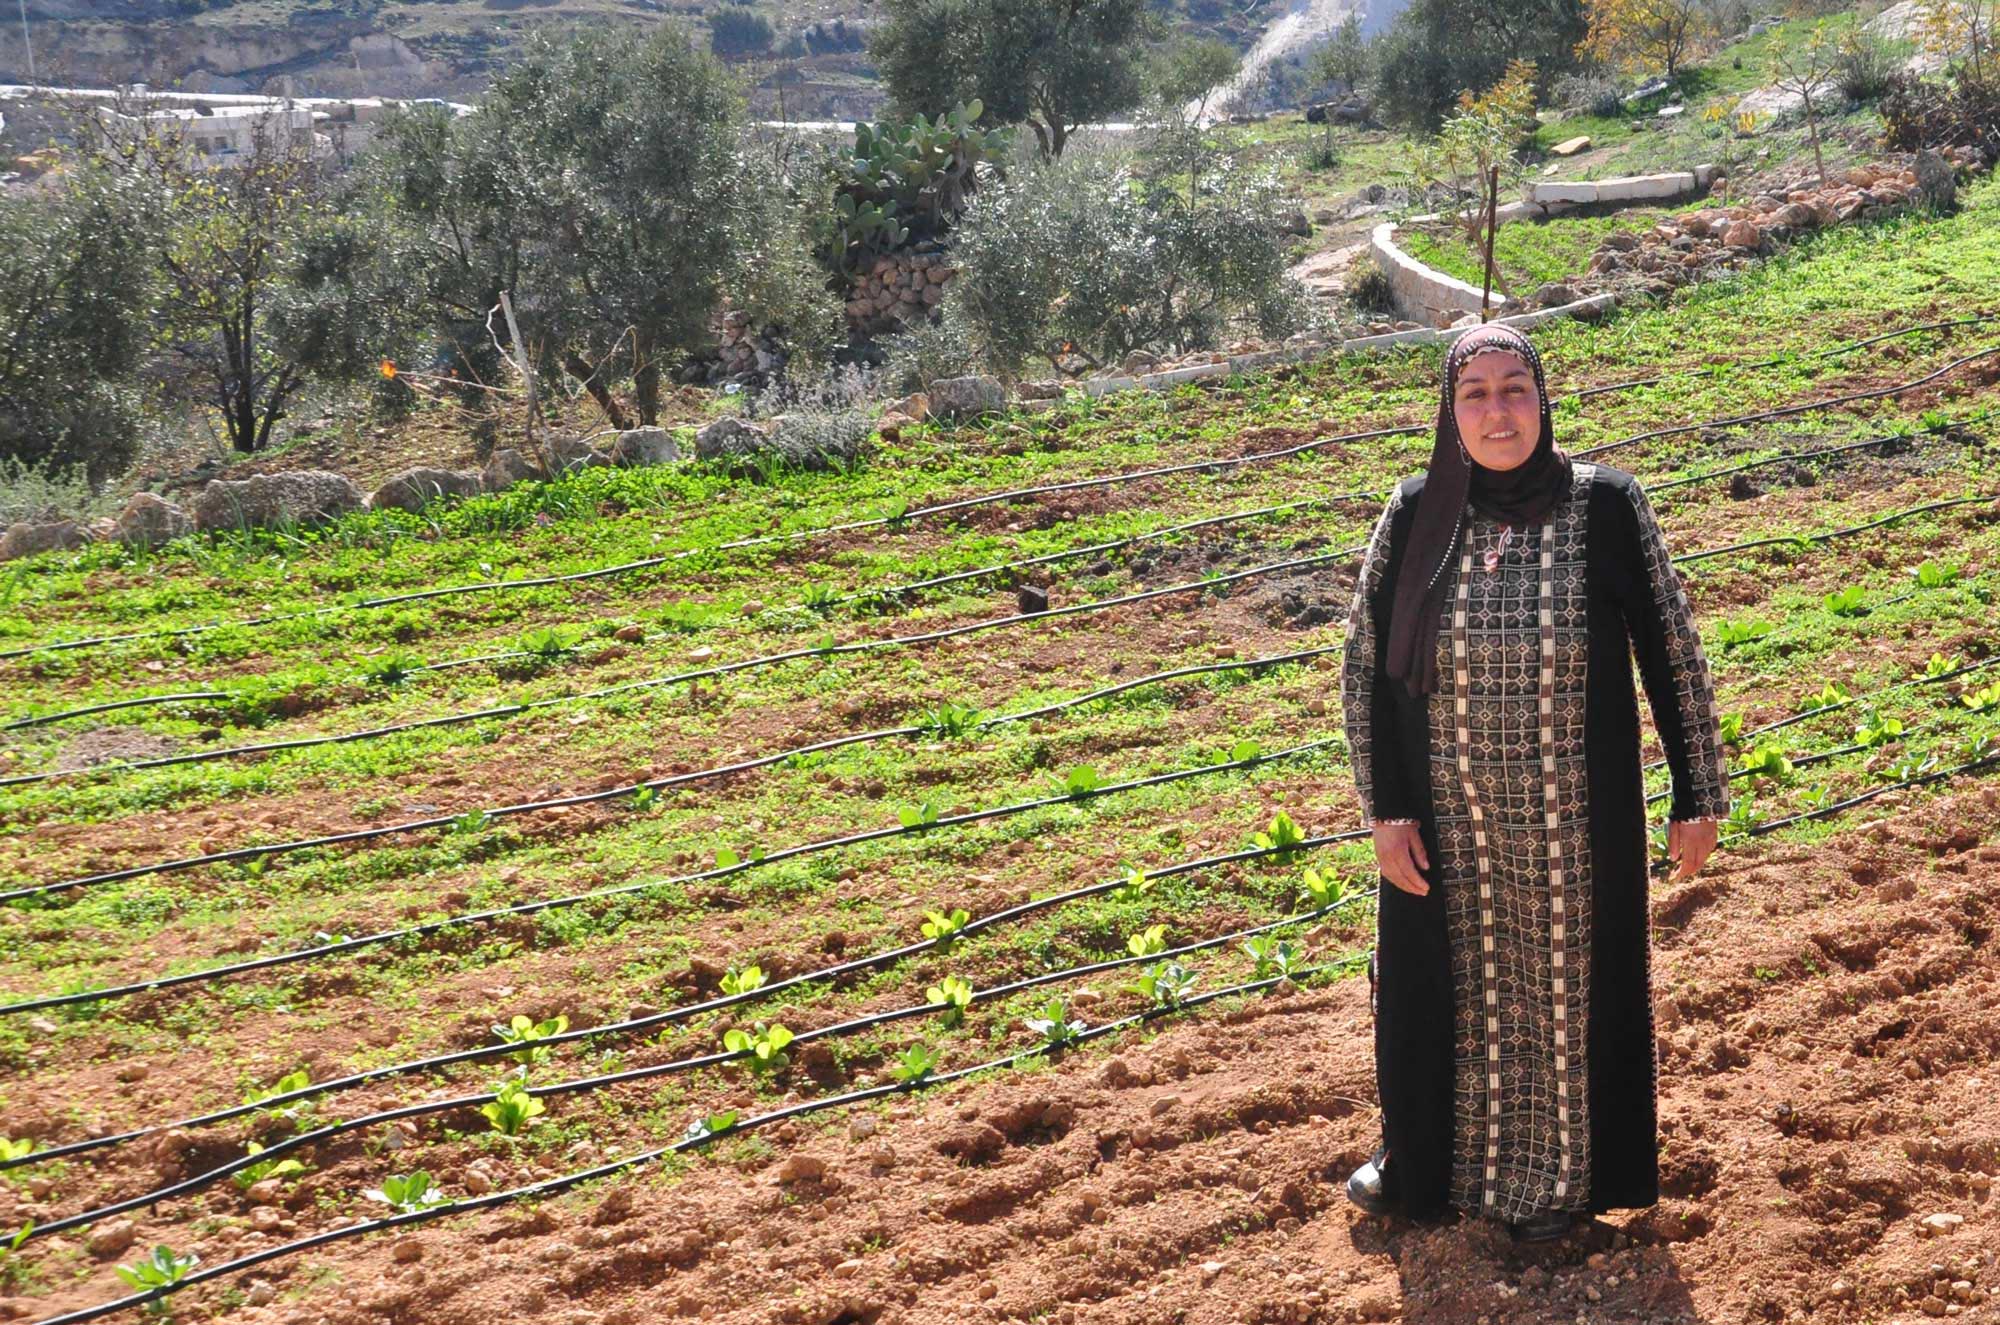 A farmer in the West Bank